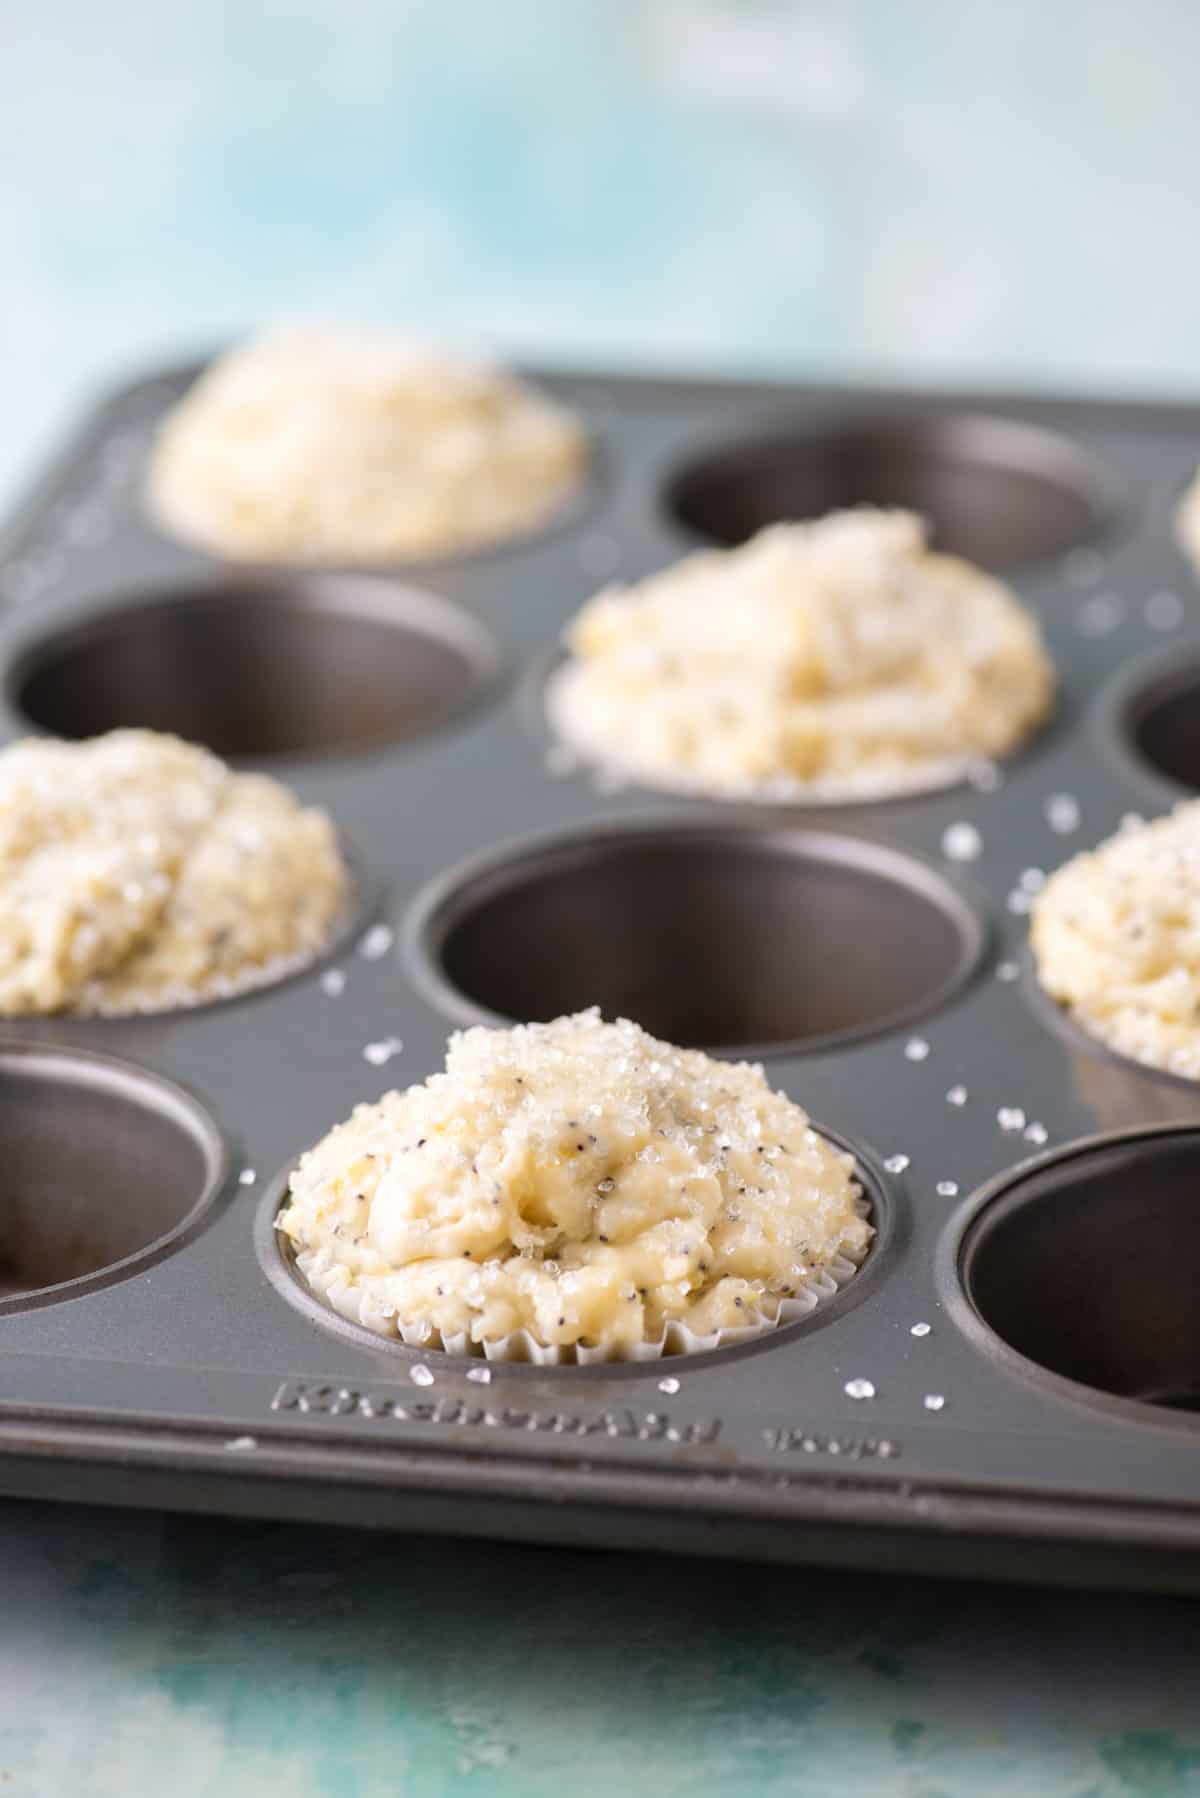 lemon poppy seed muffin batter in a muffin pan